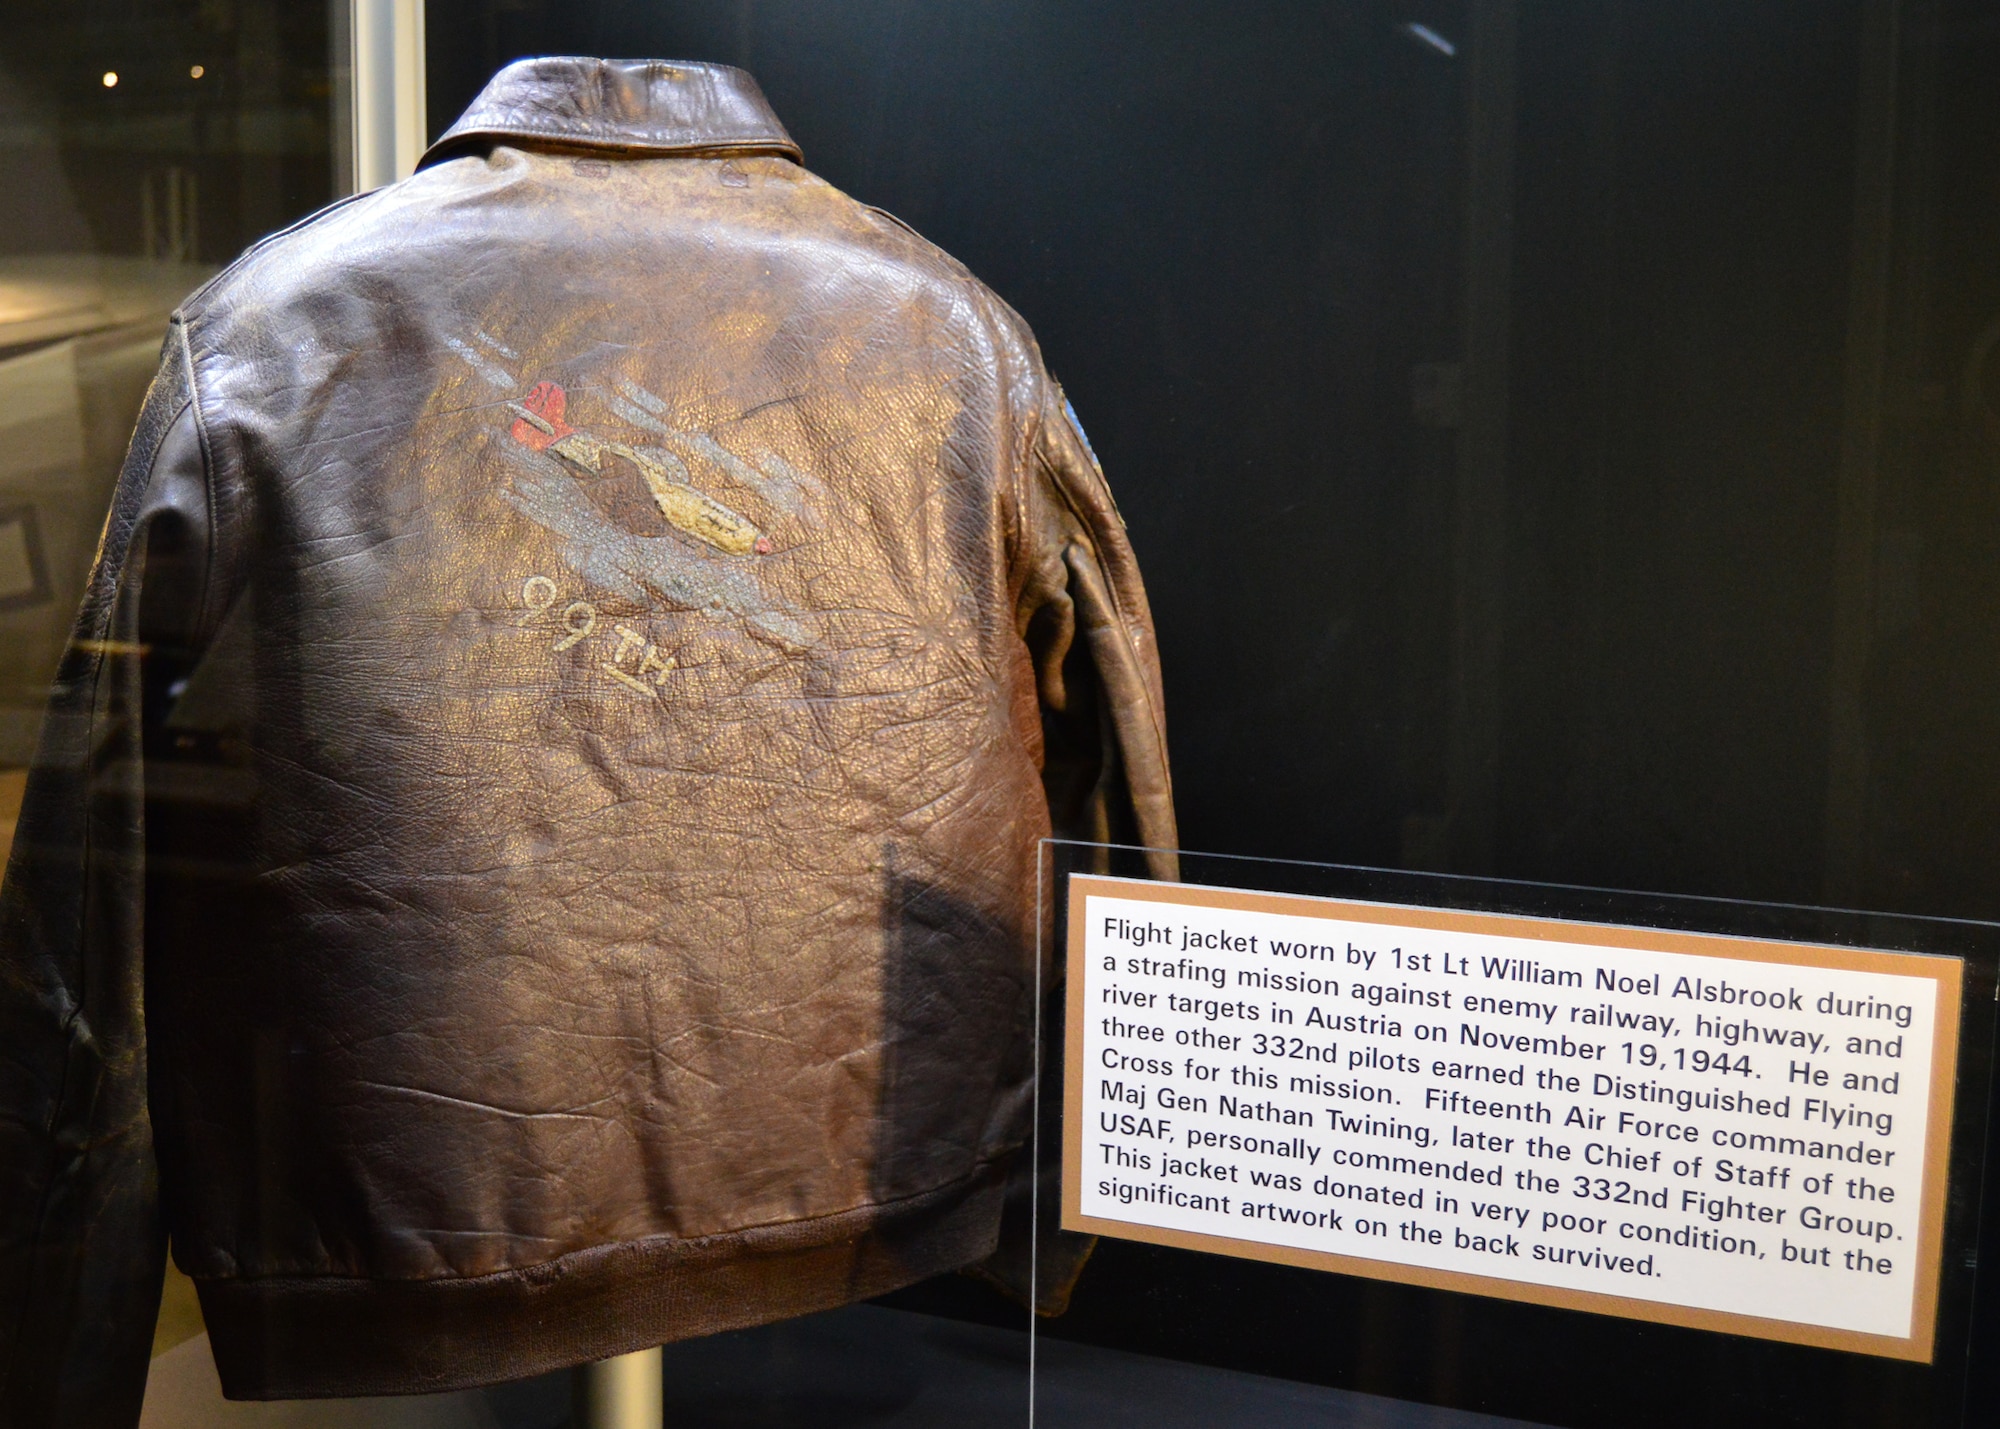 DAYTON, Ohio -- The flight jacket worn by 1st Lt. William Noel Alsbrook during a strafing mission against enemy railway, highway, and river targets in Austria on November 19, 1944.This jacket is on display in theTuskegee Airmen Exhibit in the WWII Gallery at the National Museum of the U.S. Air Force. (U.S. Air Force photo)